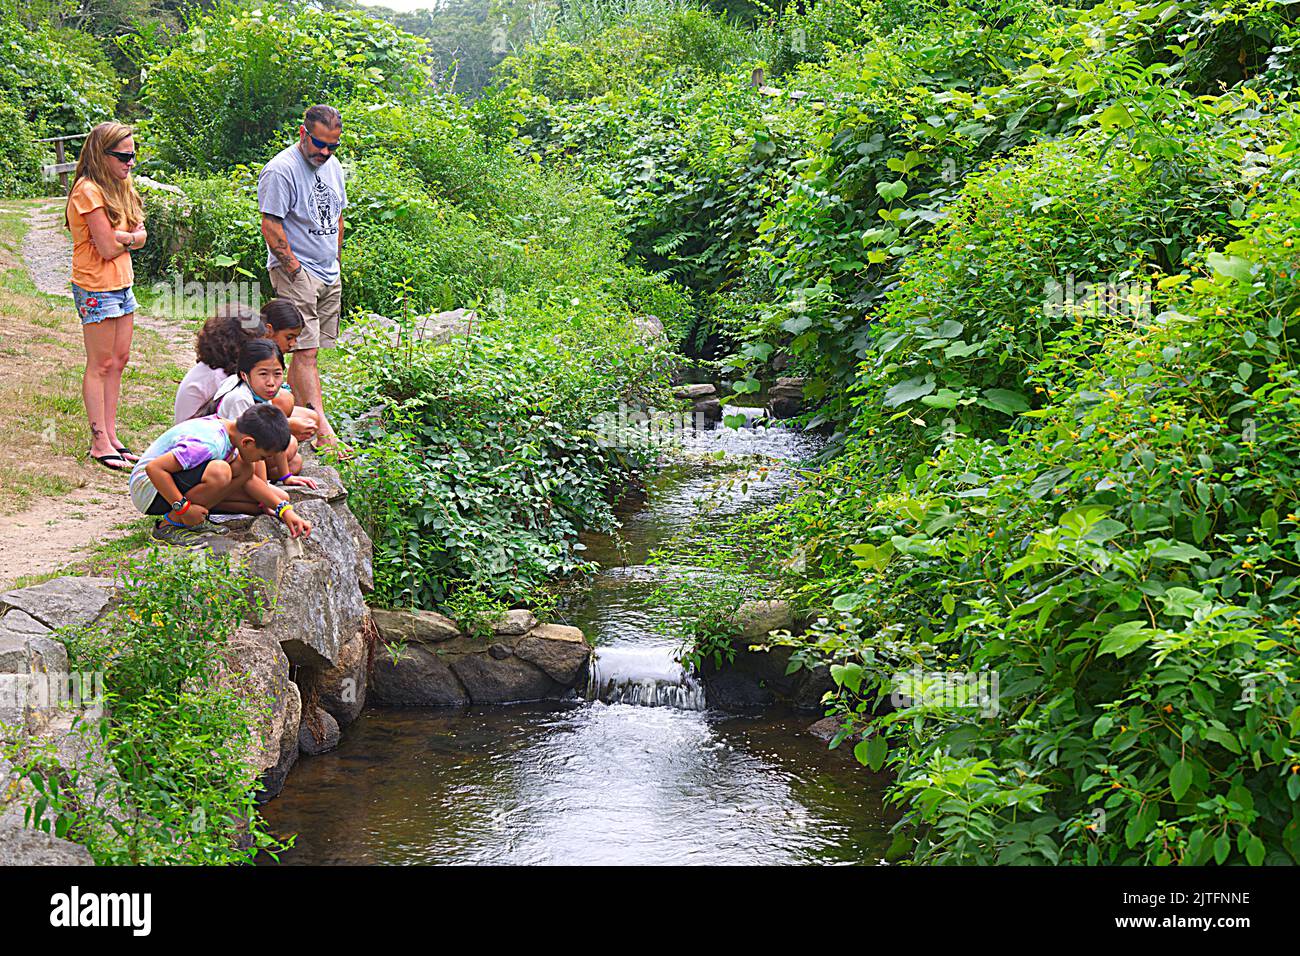 A group studies the brook at the historic Stony Brook Grist Mill in Brewster, Massachusetts on Cape Cod. Stock Photo